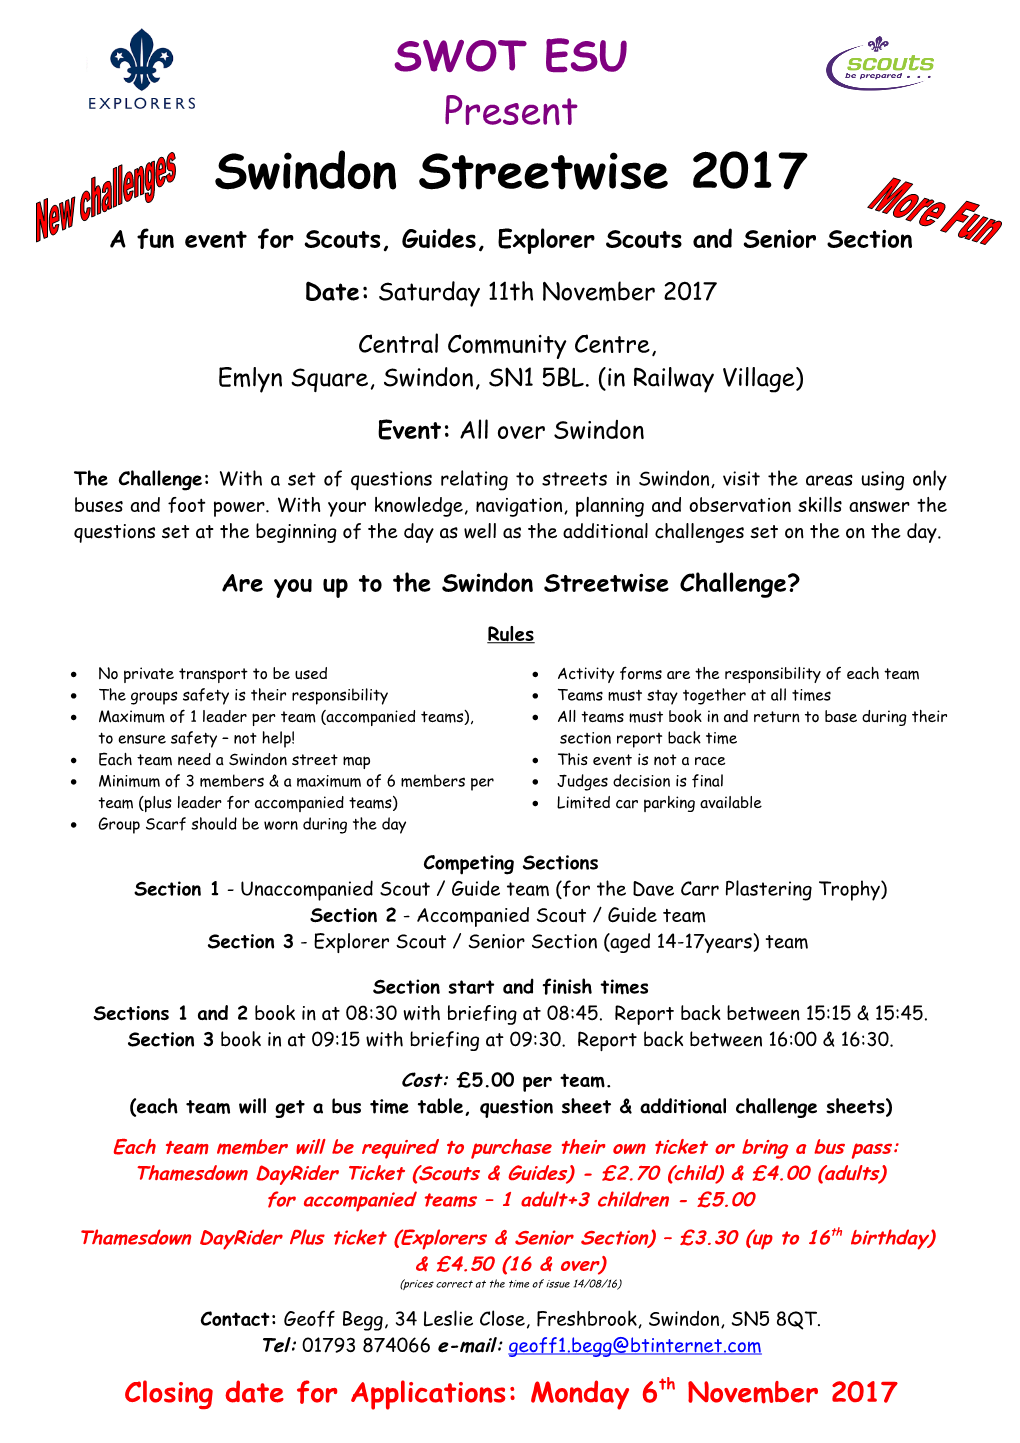 A Fun Event for Scouts, Guides, Explorer Scouts and Senior Section